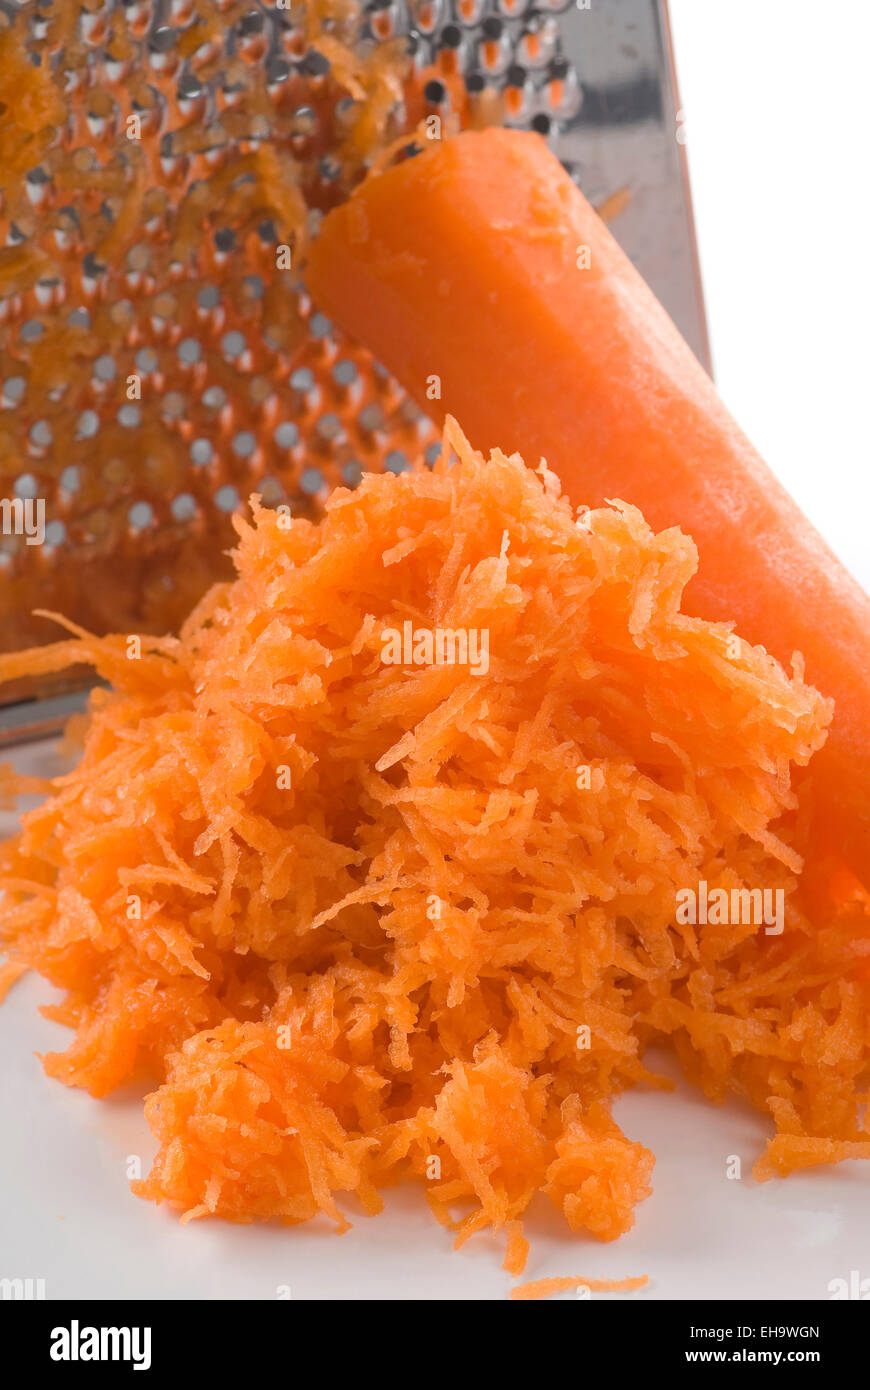 Grated carrot on a plate. Stock Photo